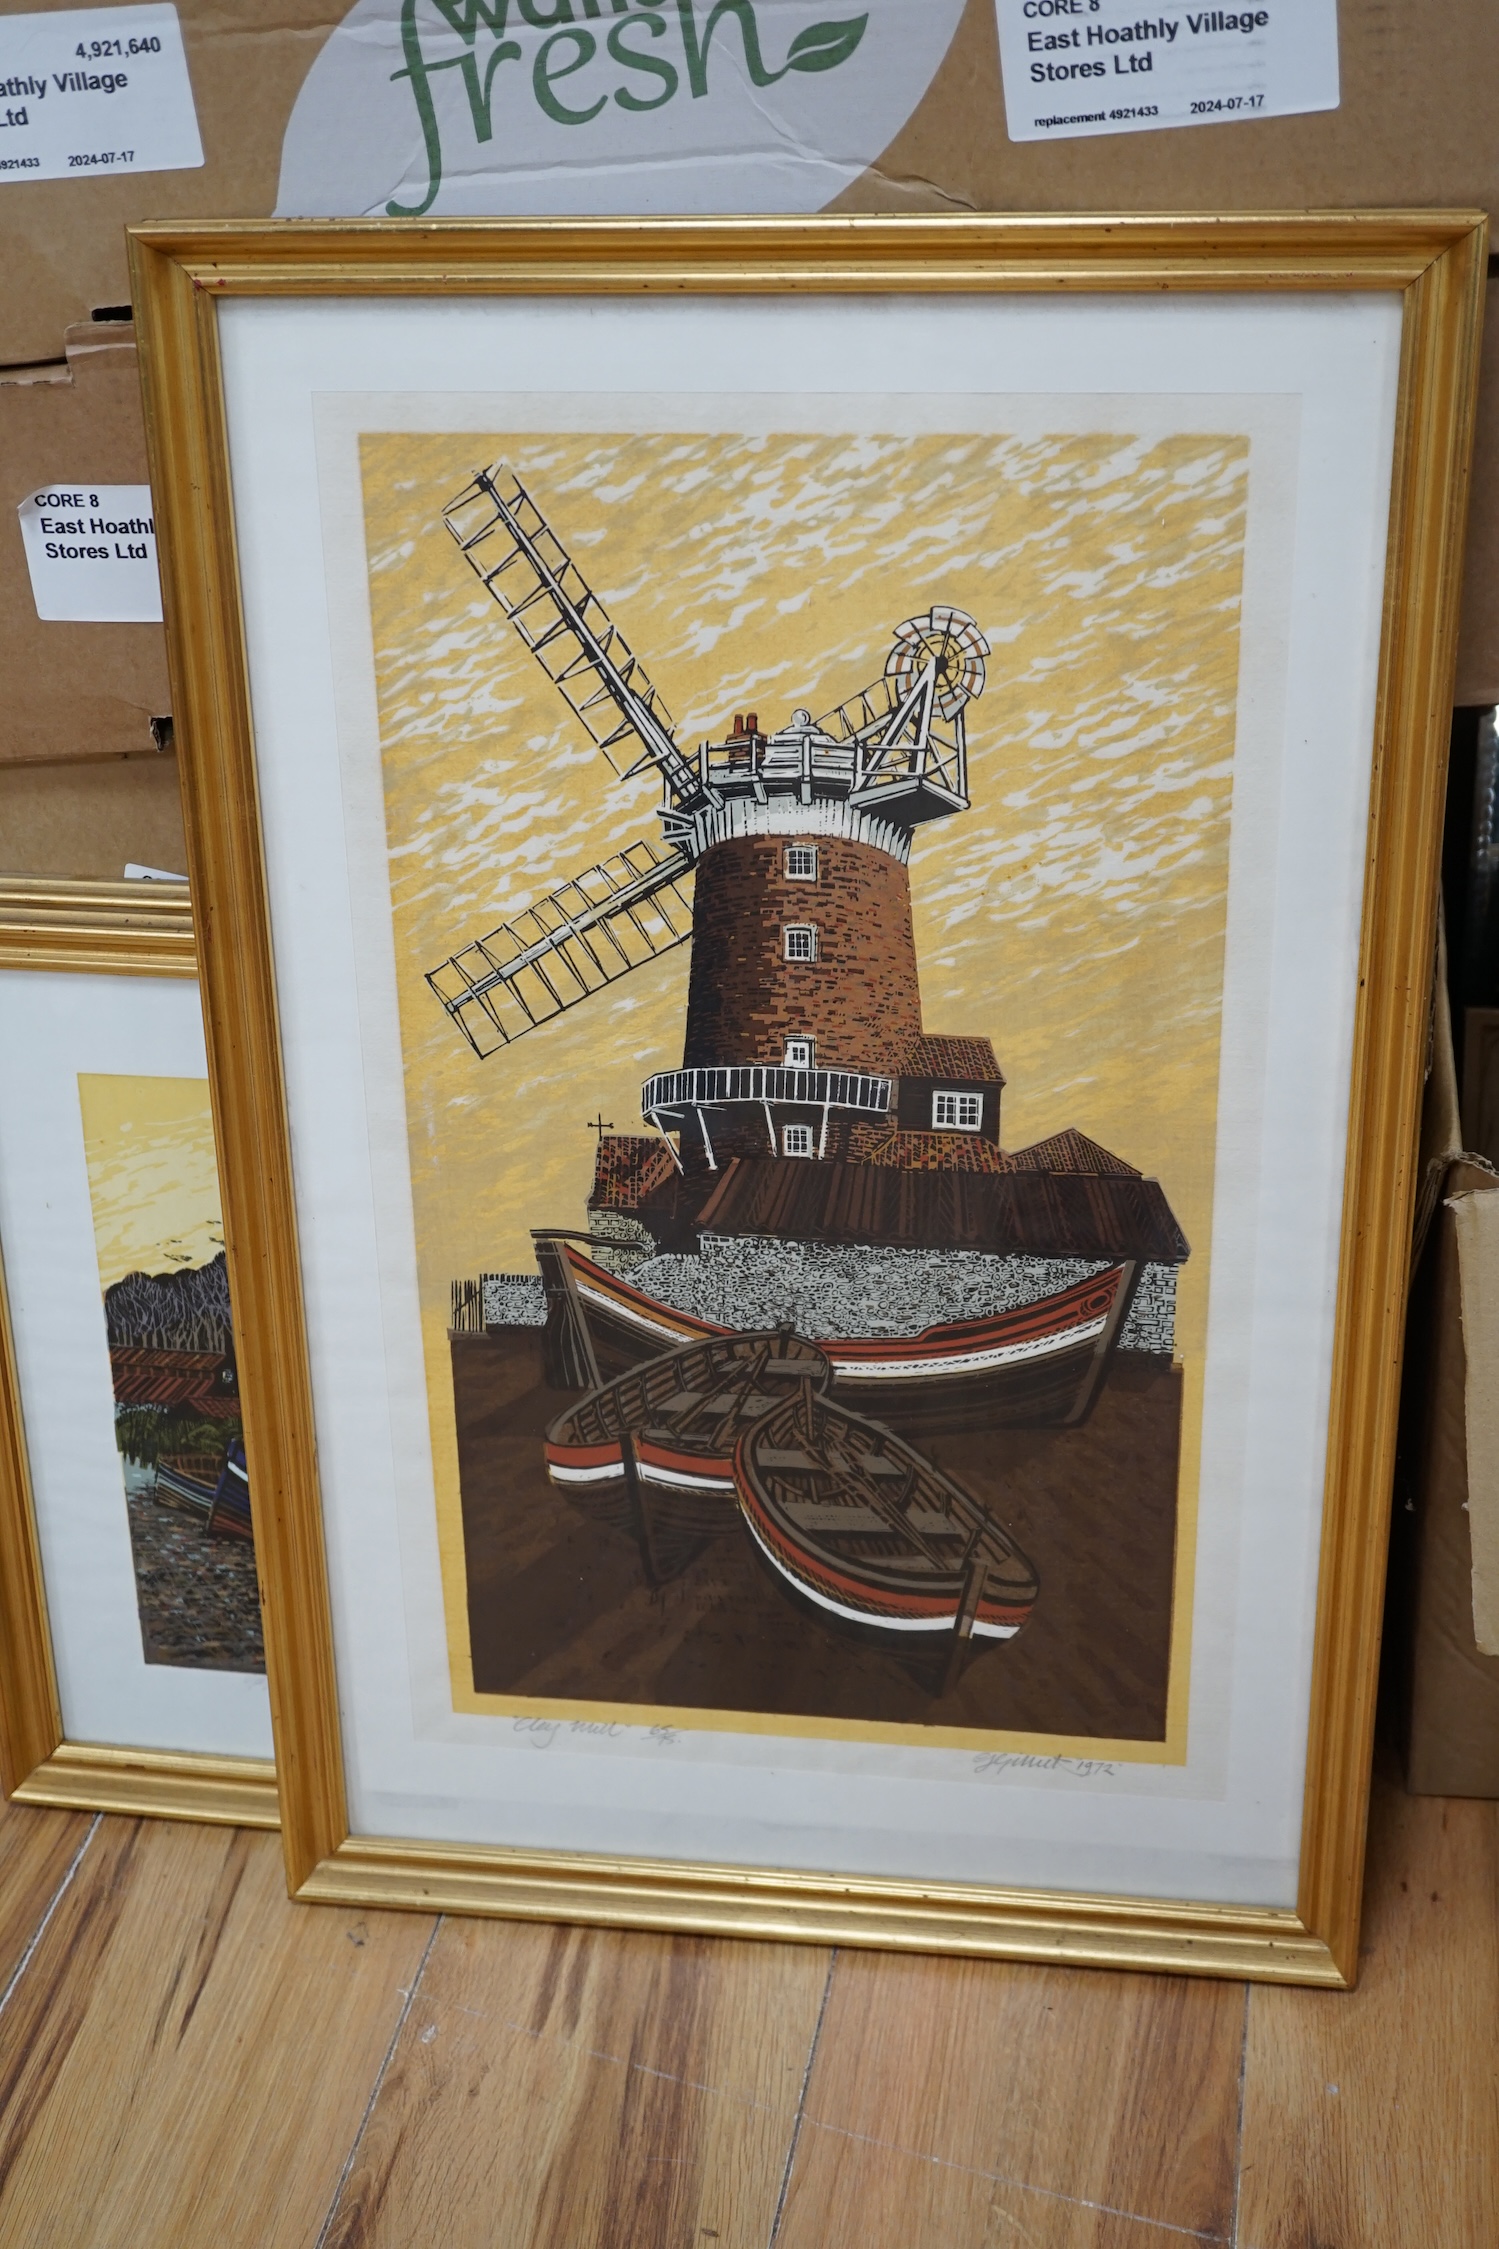 G. Gillick, four colour linocuts including 'Wells Next the Sea', 'Clay Mill', 'Blakeney Quay' and 'White House at Brancaster', each signed in pencil and limited edition, largest 51 x 32cm. Condition - fair